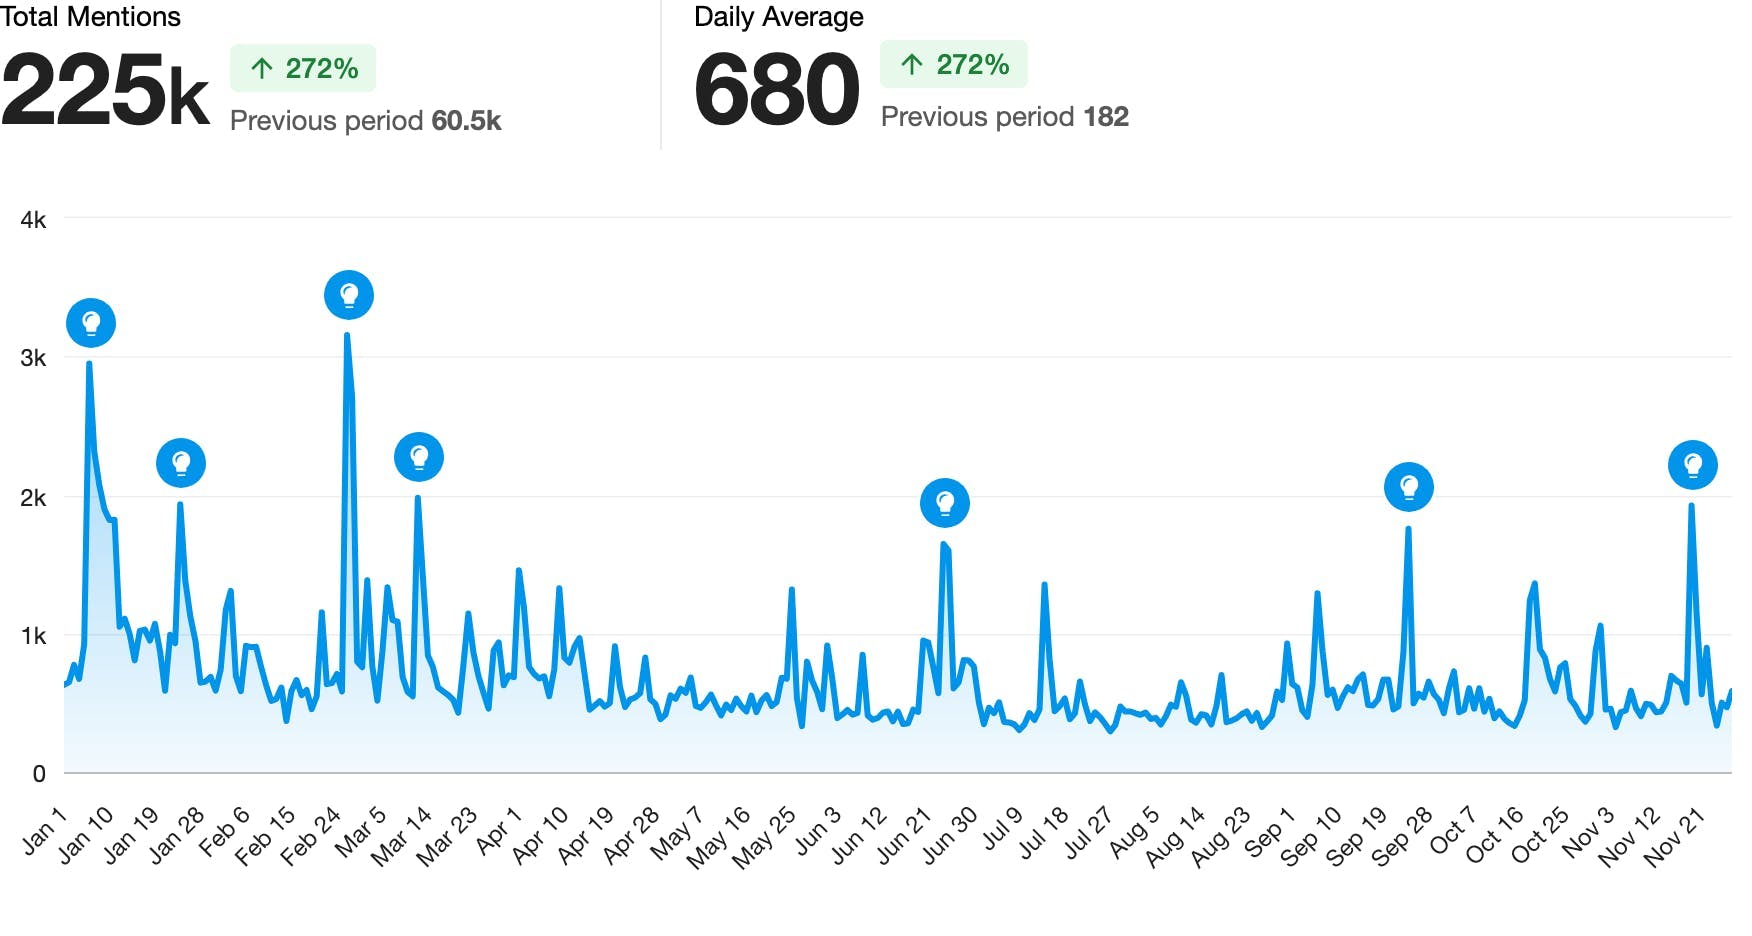 This chart shows that mentions of "nepo baby" spiked dramatically throughout the year with 225,000 total mentions at an average of 680 per day.